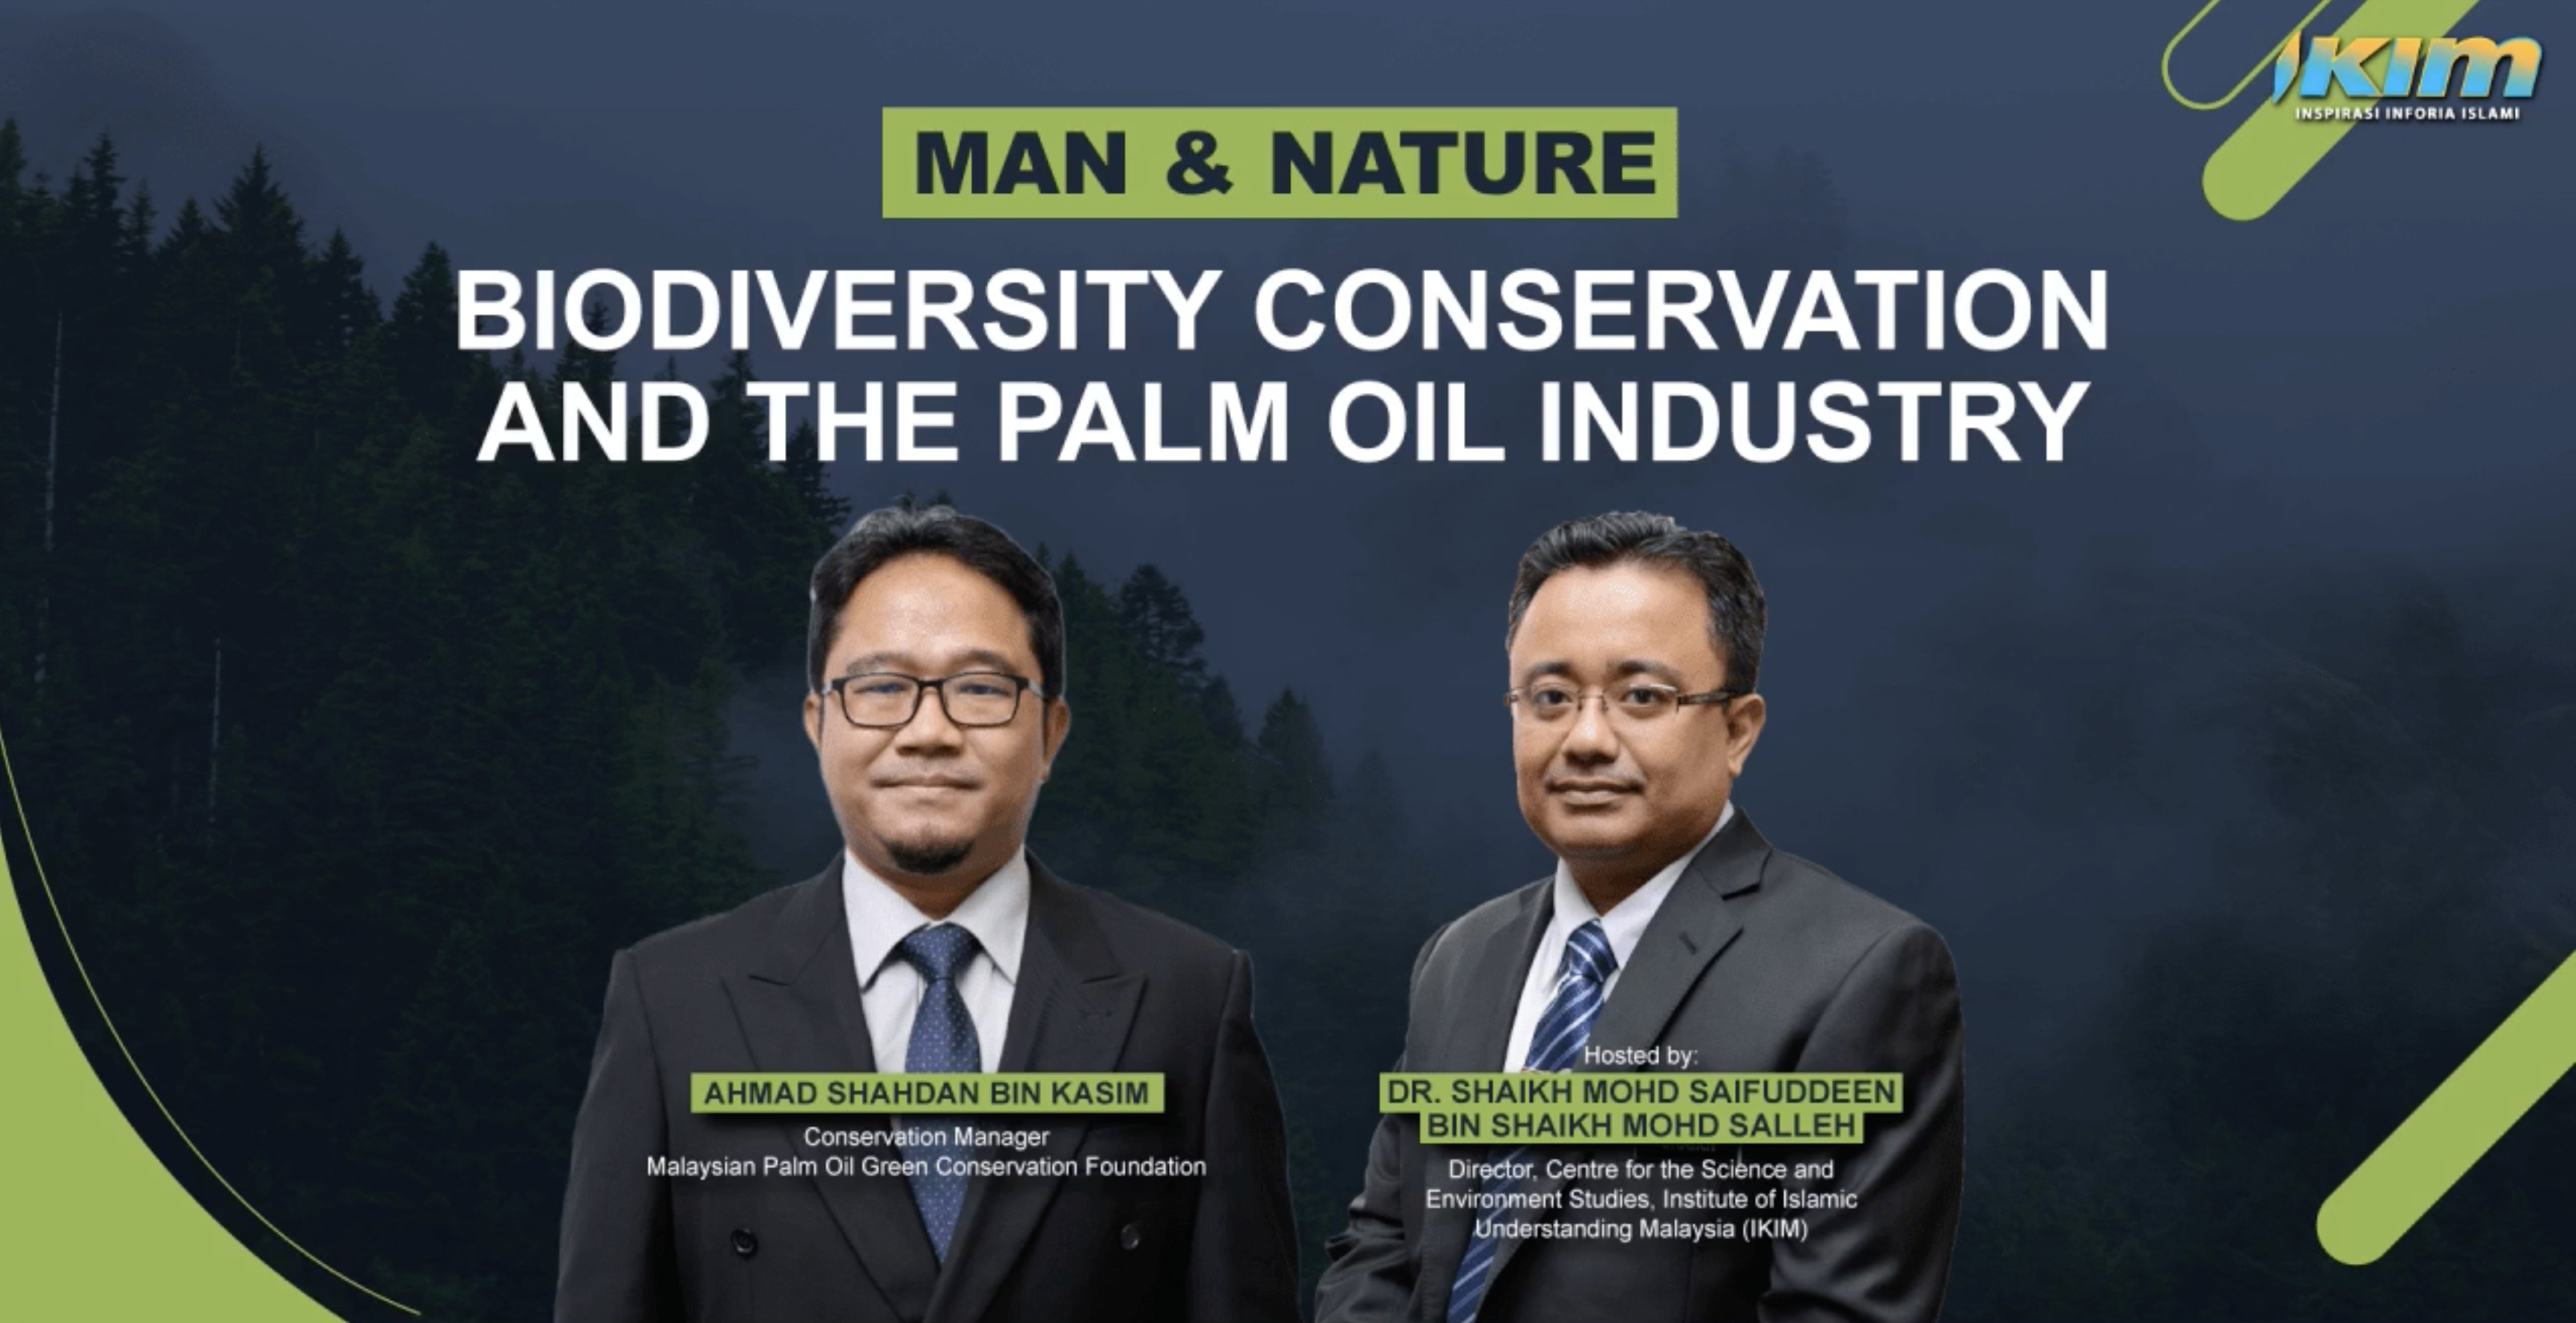 IKIM MAN & NATURE, Biodiversity Conservation and The Palm Oil Industry